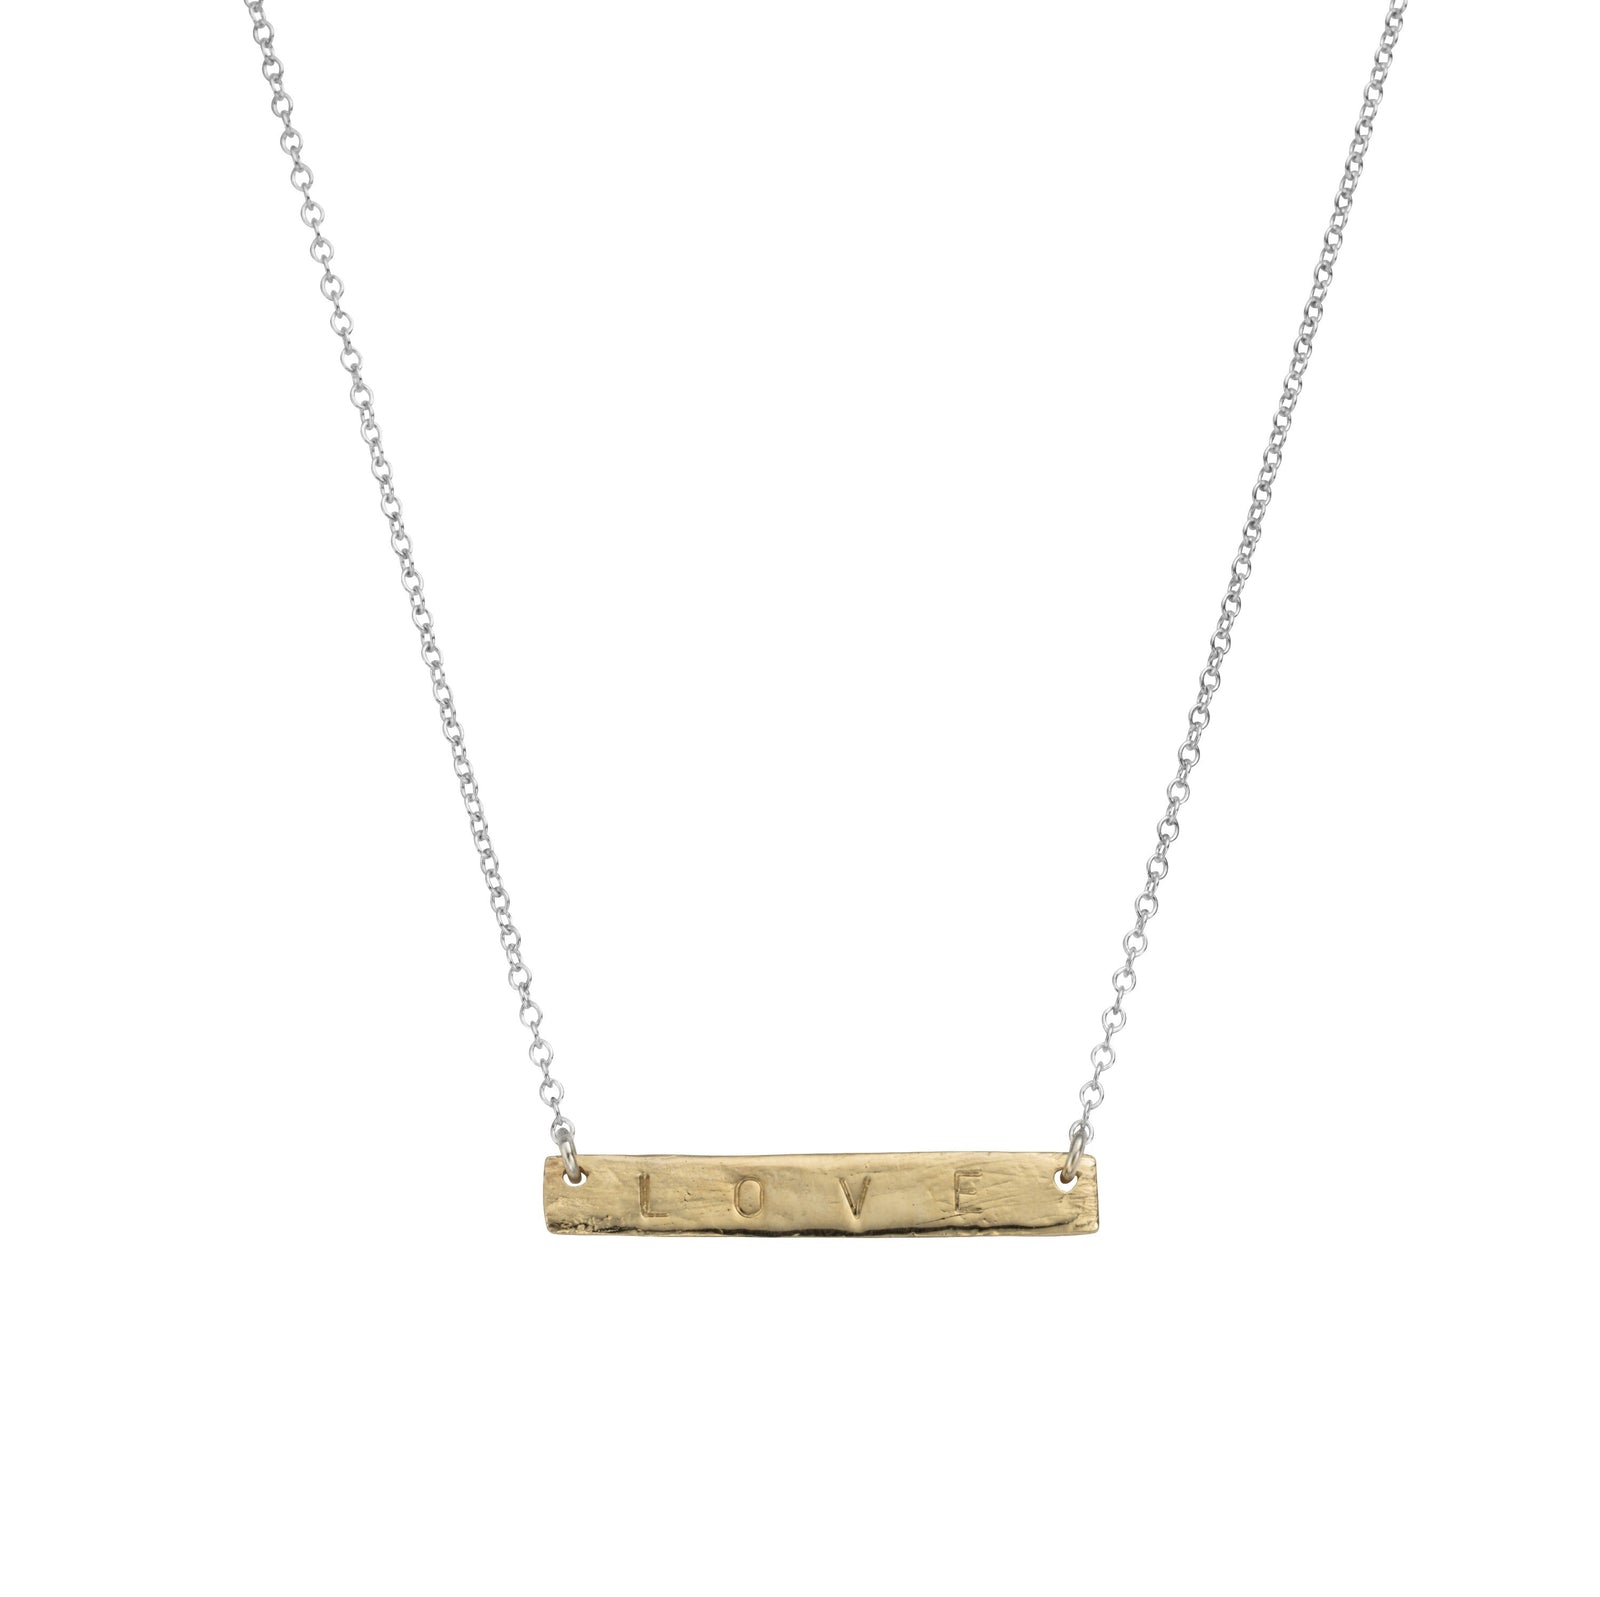 Silver & Gold Bar Necklace